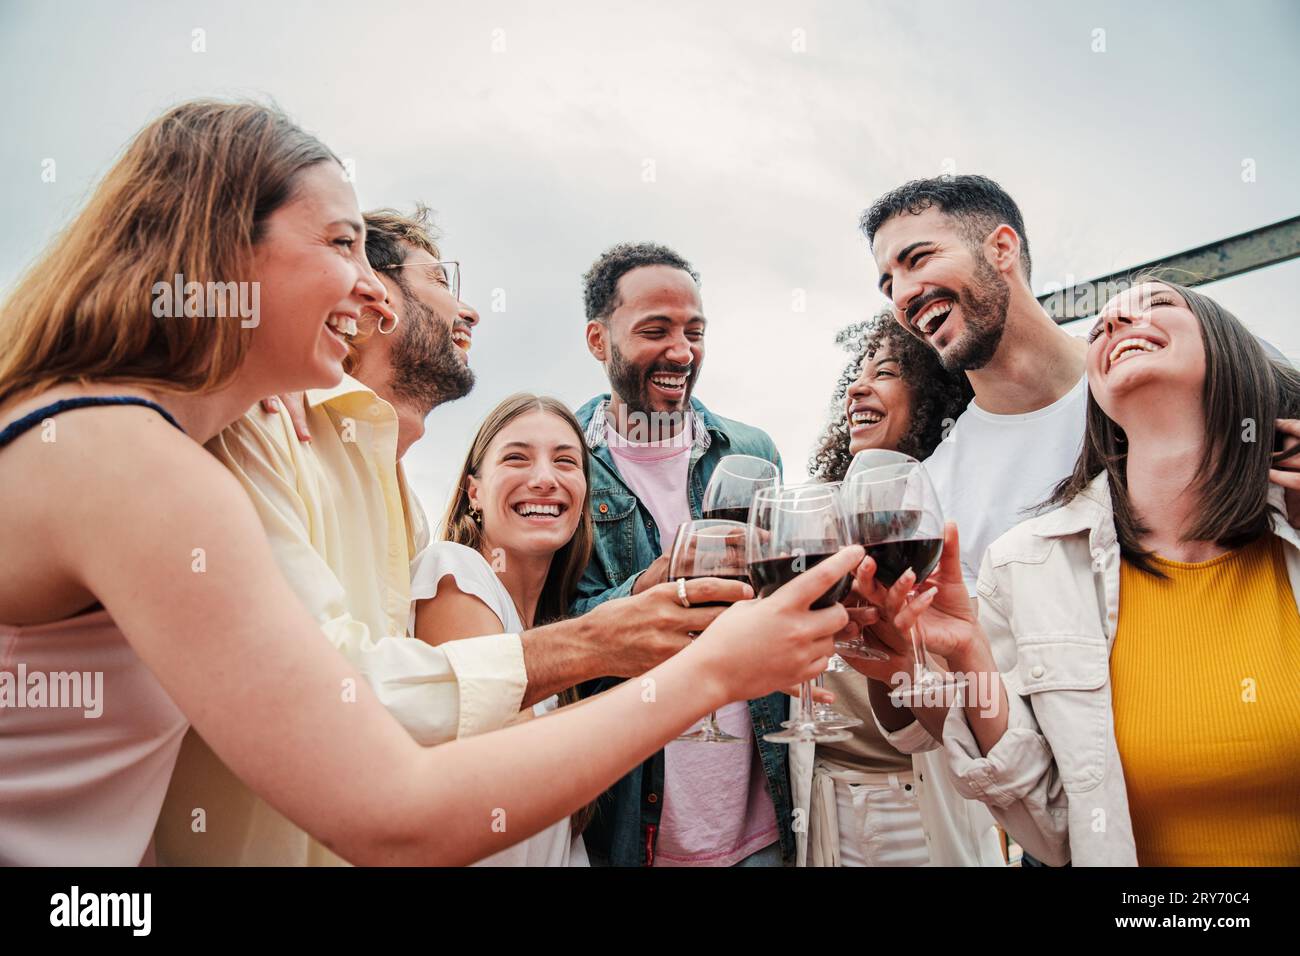 Group of young adult mates having fun toasting wine glasses and having fun on a party celebration. Friends talking, smiling and drinking redwine together at funny birthday enjoying their friendship. High quality photo Stock Photo